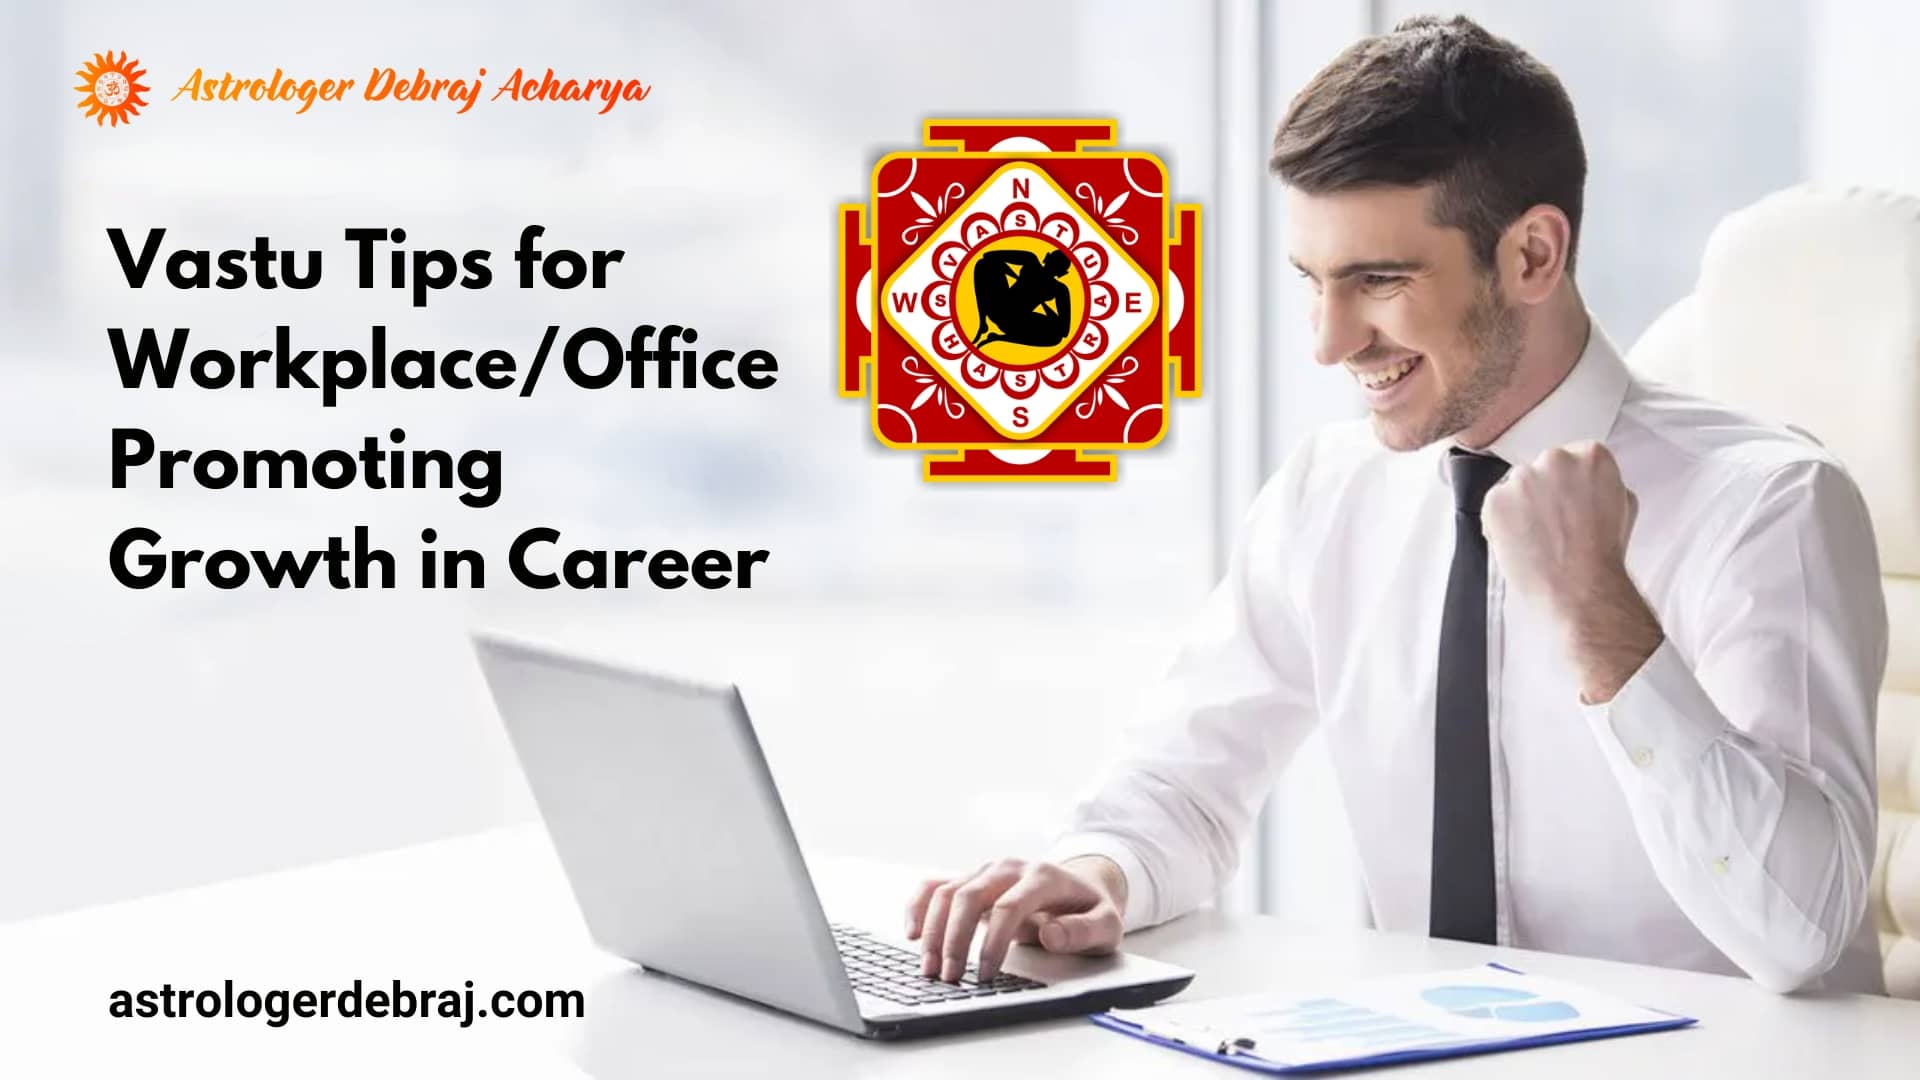 Vastu Tips for Workplace Office